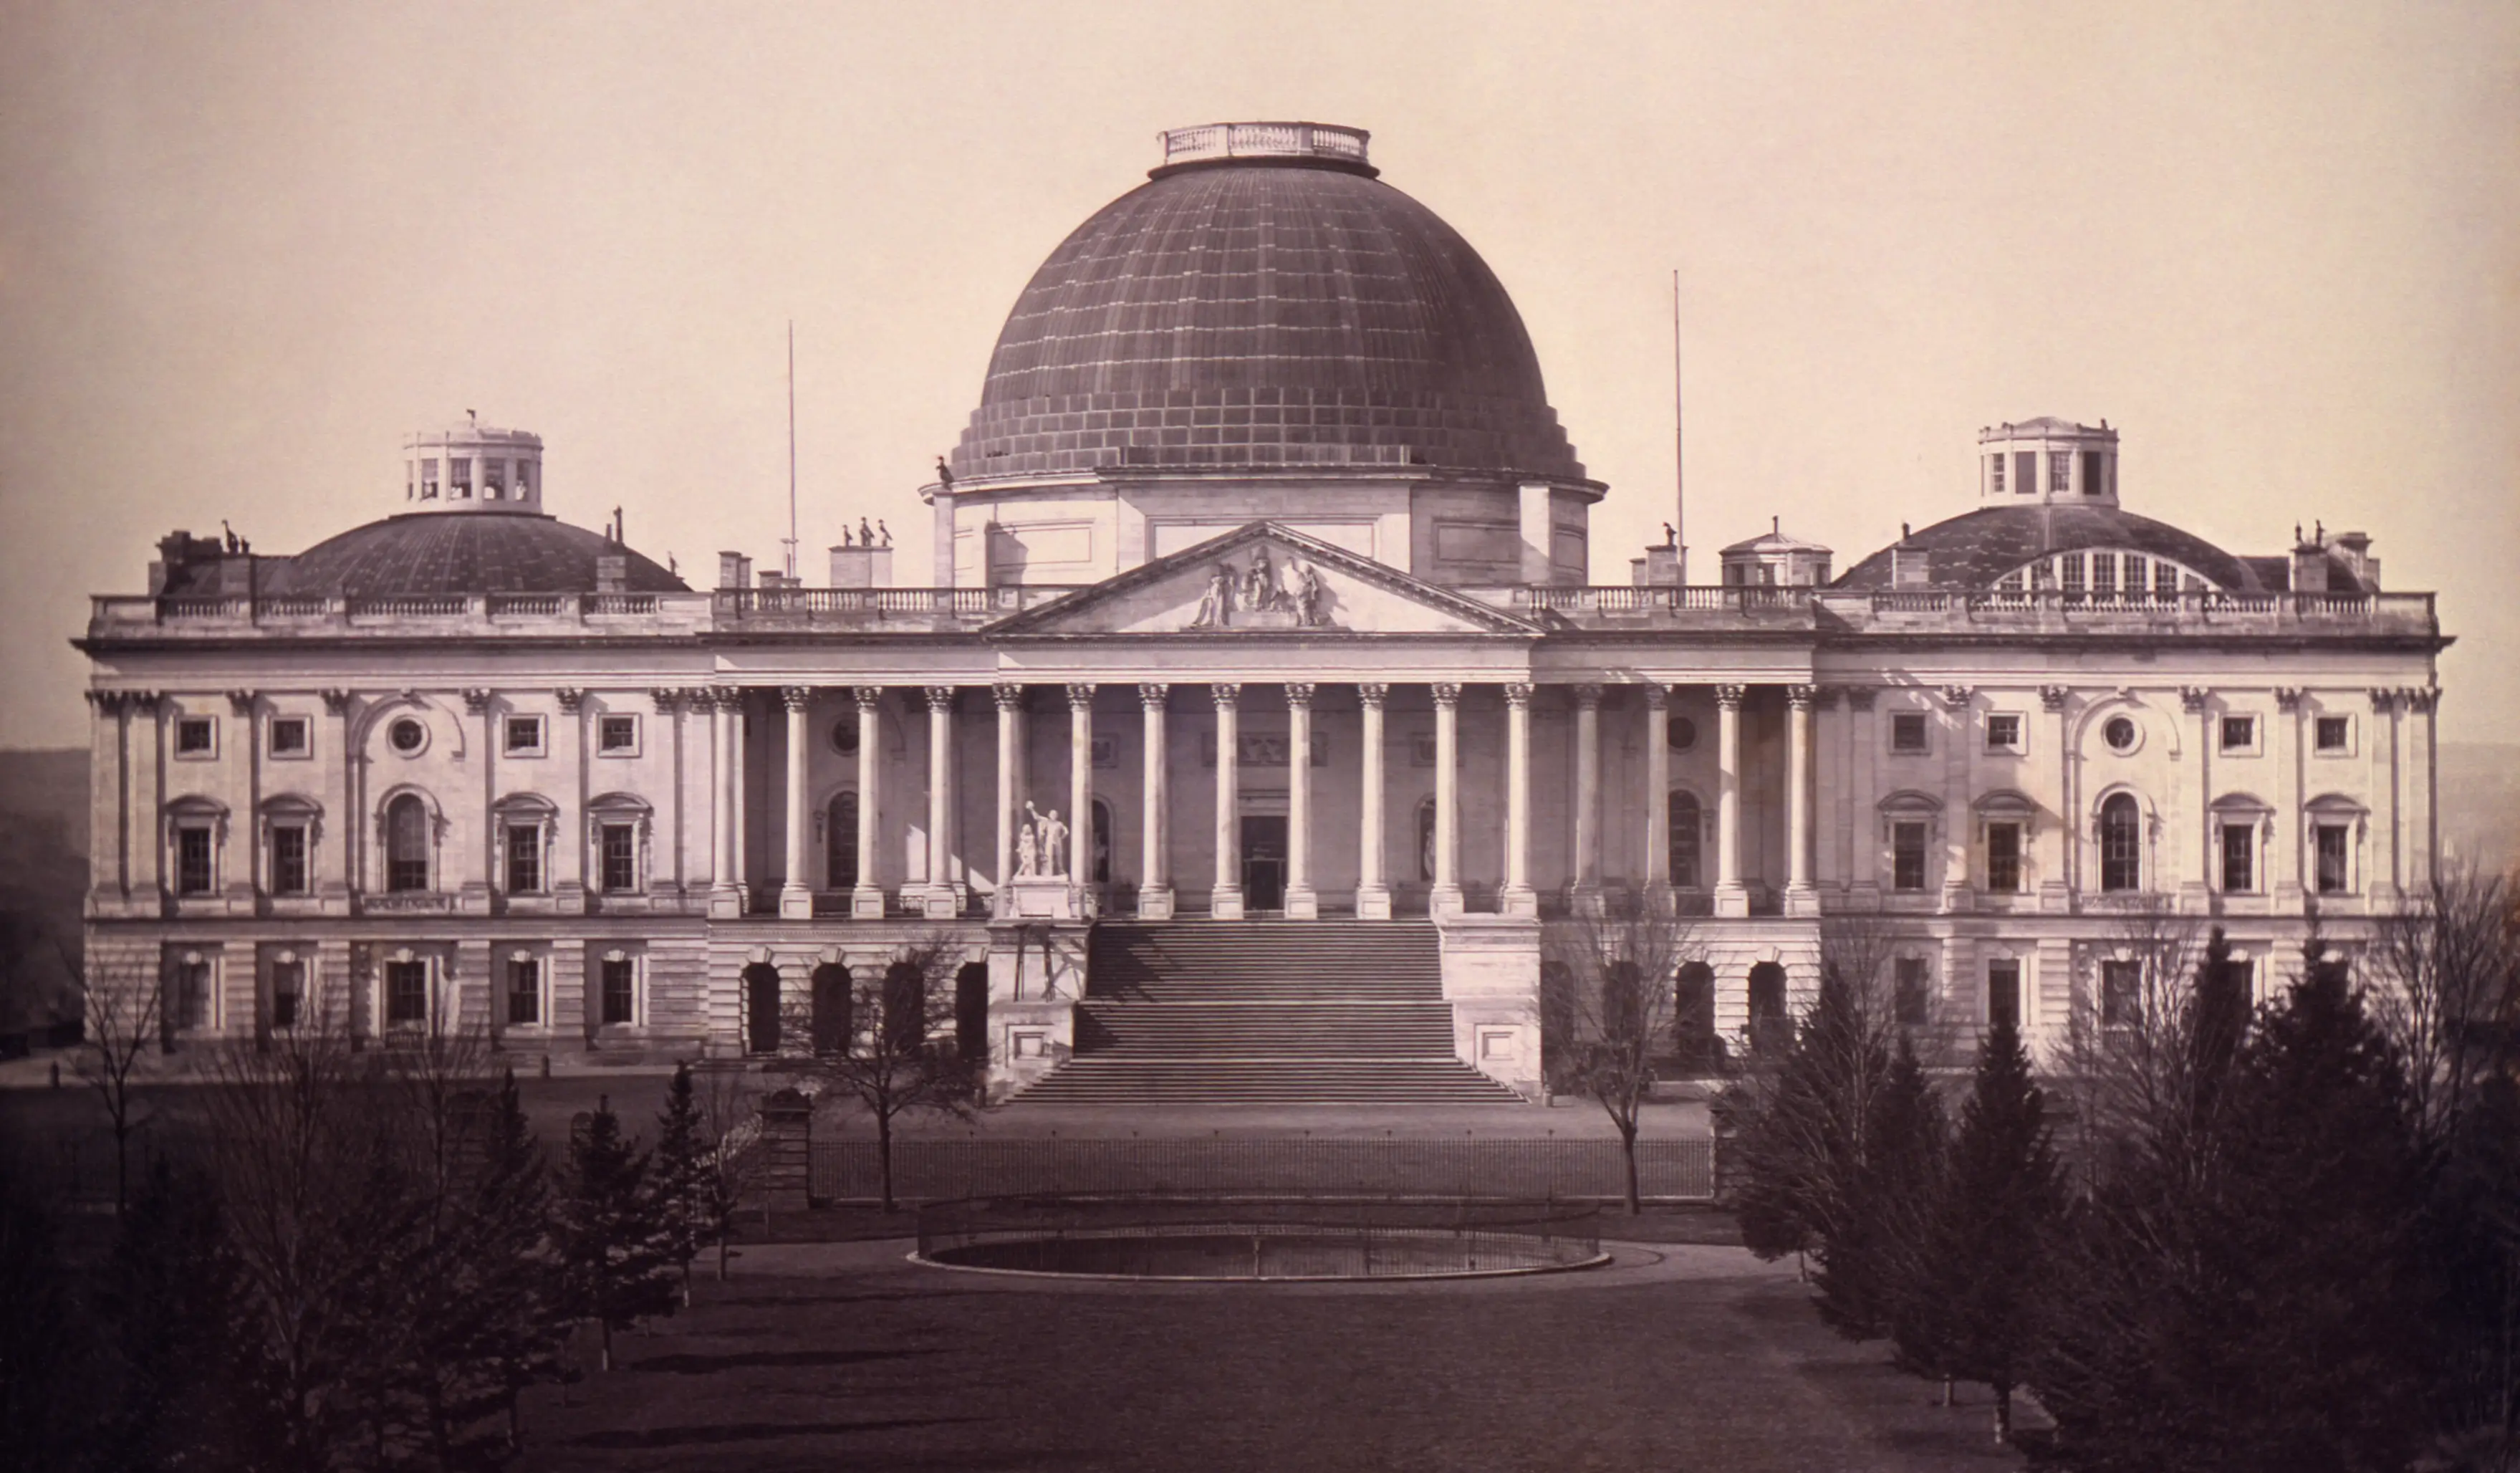 Completed construction of The Capitol